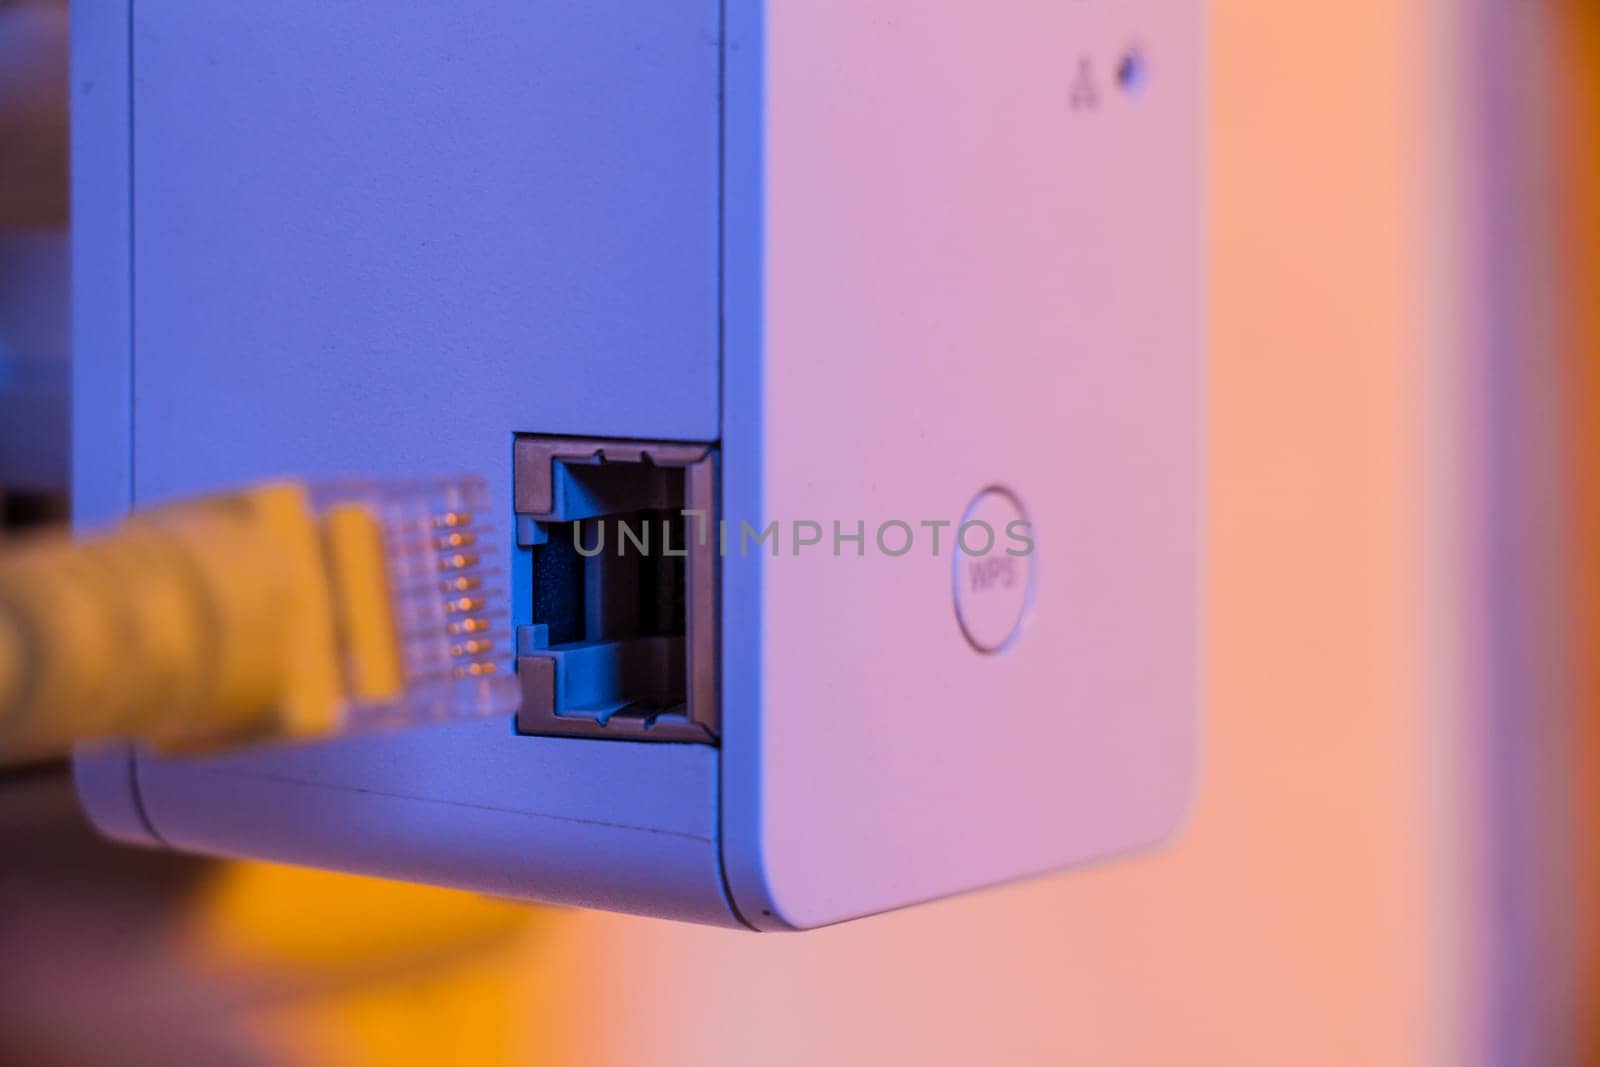 Insert ethernet cable into WiFi extender device which is in electrical socket on the wall. The device is in access point mode that help to extend wireless network in home or office.